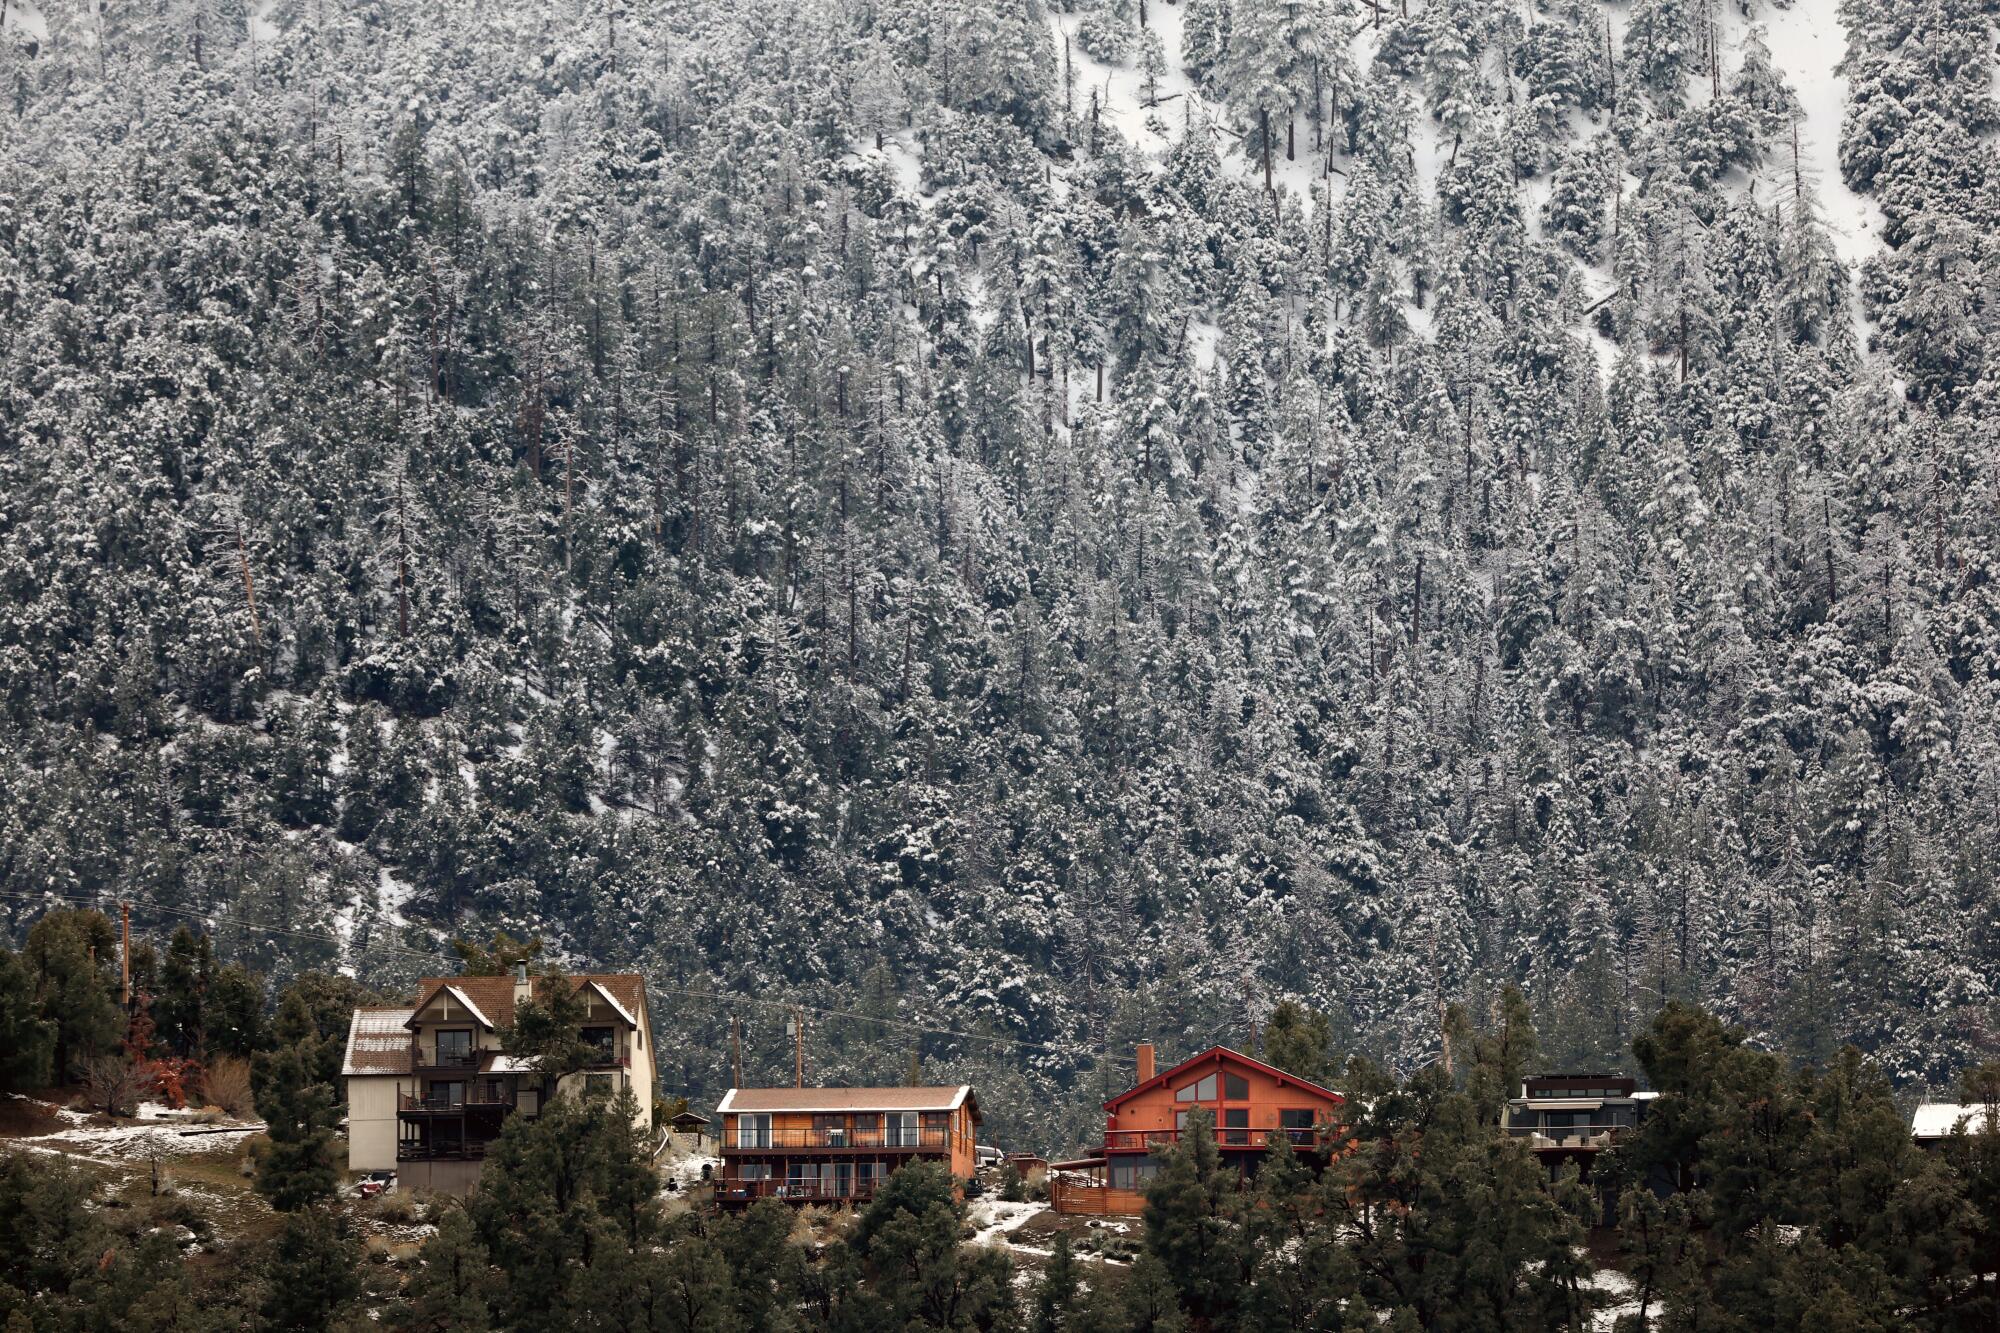 A row of homes is dwarfed by a snowy mountain in the background.